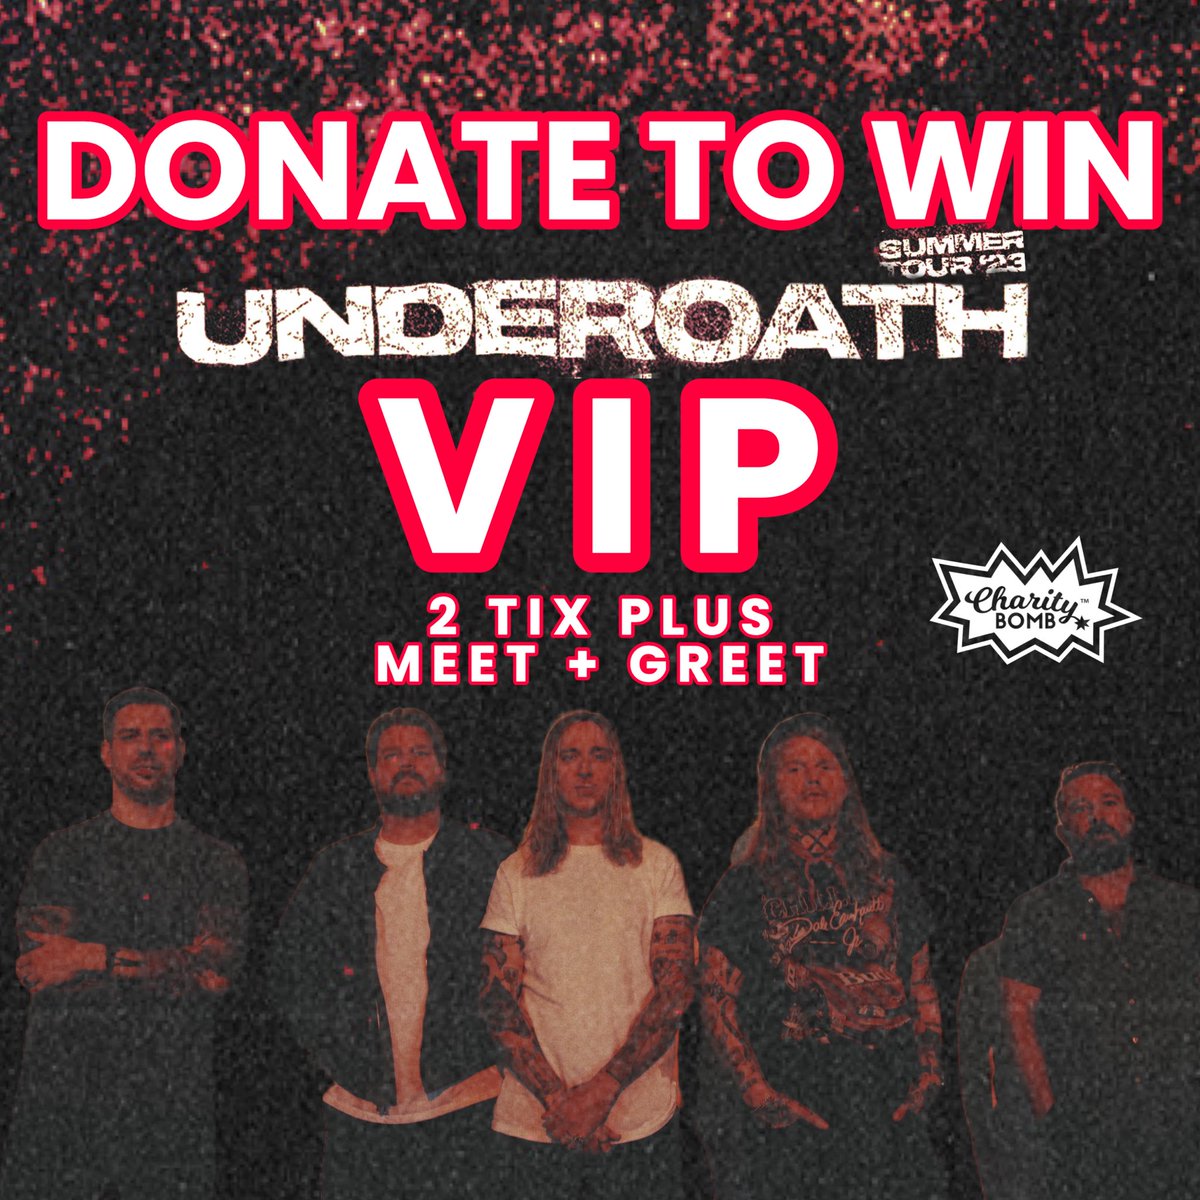 ATTN: San Antonio, Dallas, Albuquerque, Tempe, San Francisco, & Santa Ana - 
 
We teamed up with @charitybomborg for your chance to win VIP meet & greet tickets + a merch bundle to our upcoming shows in your cities.

Enter to win here:  charitybomb.org/underoath-summ…